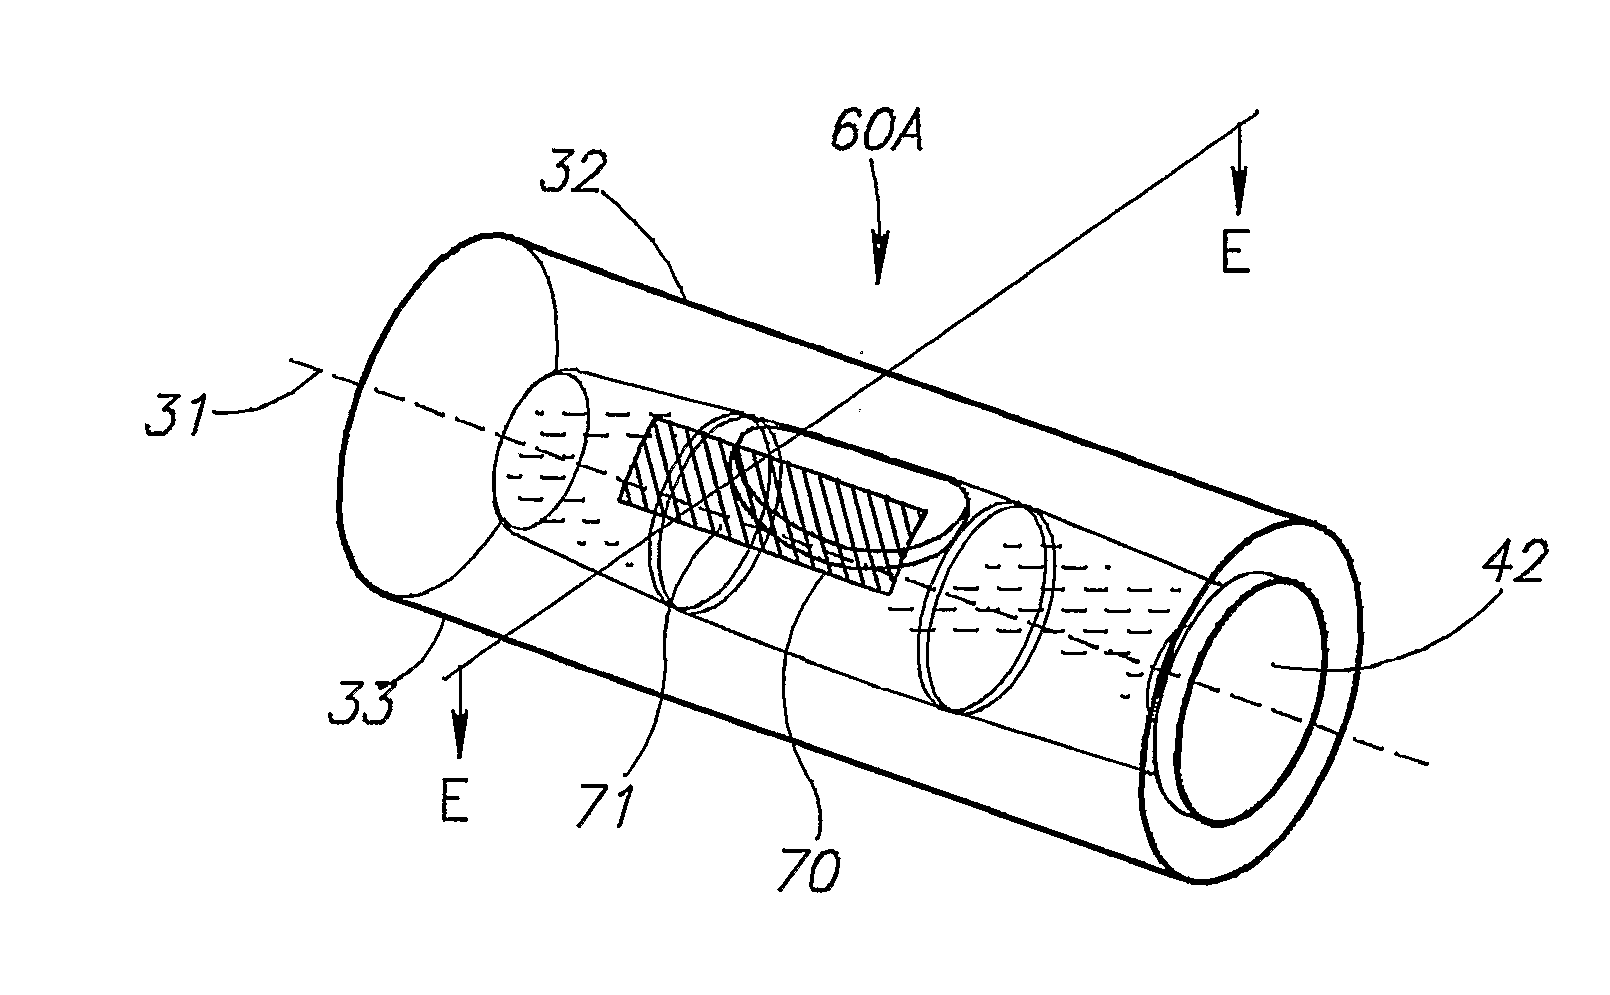 Spirit level having horizontal bubble vial with improved bubble visibility